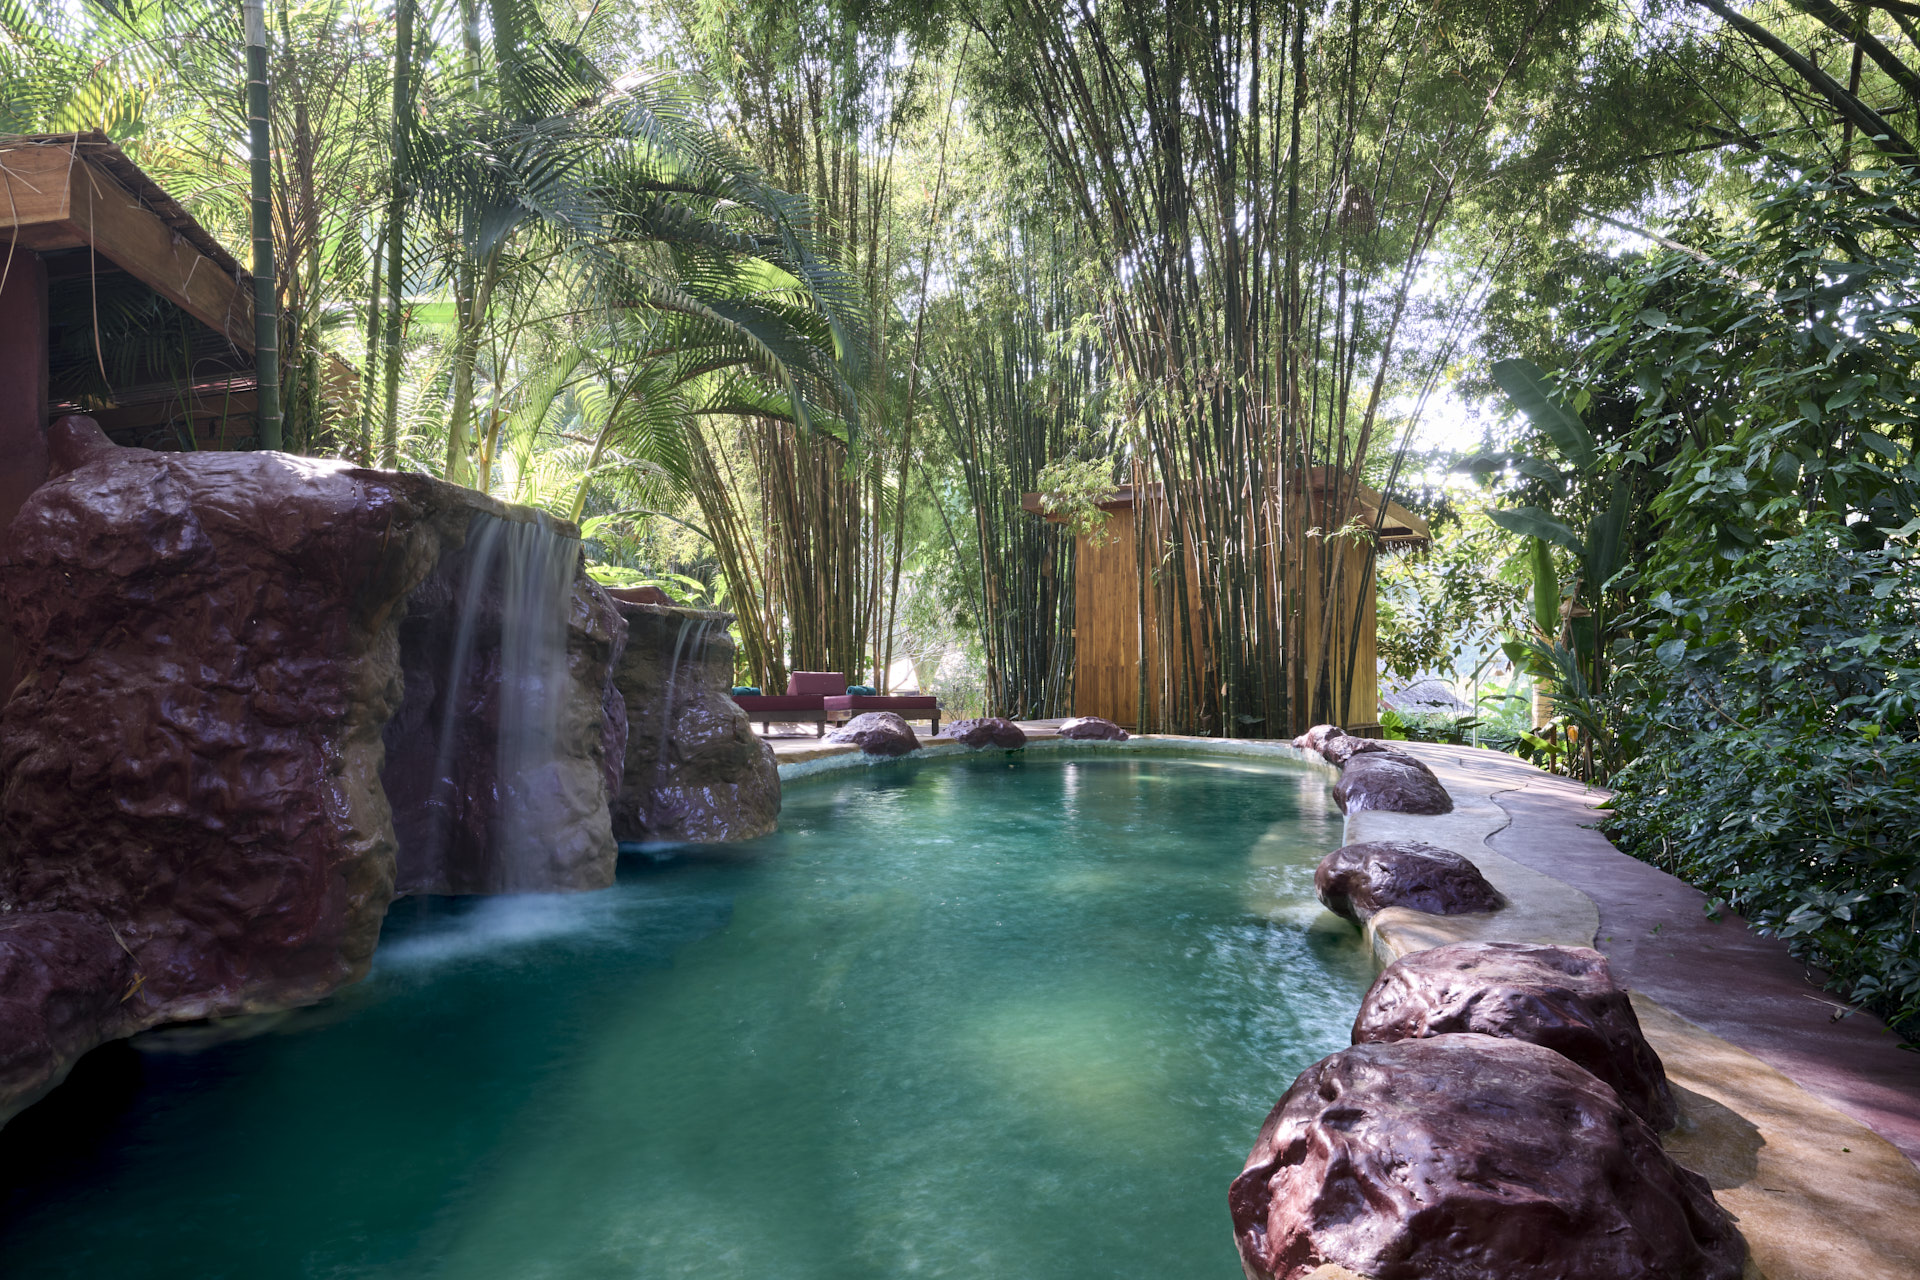 Outdoor hot spring pool surrounded by bamboo and tropical plants, with artificial waterfall and rock features, near a wooden building in Luang Prabang.